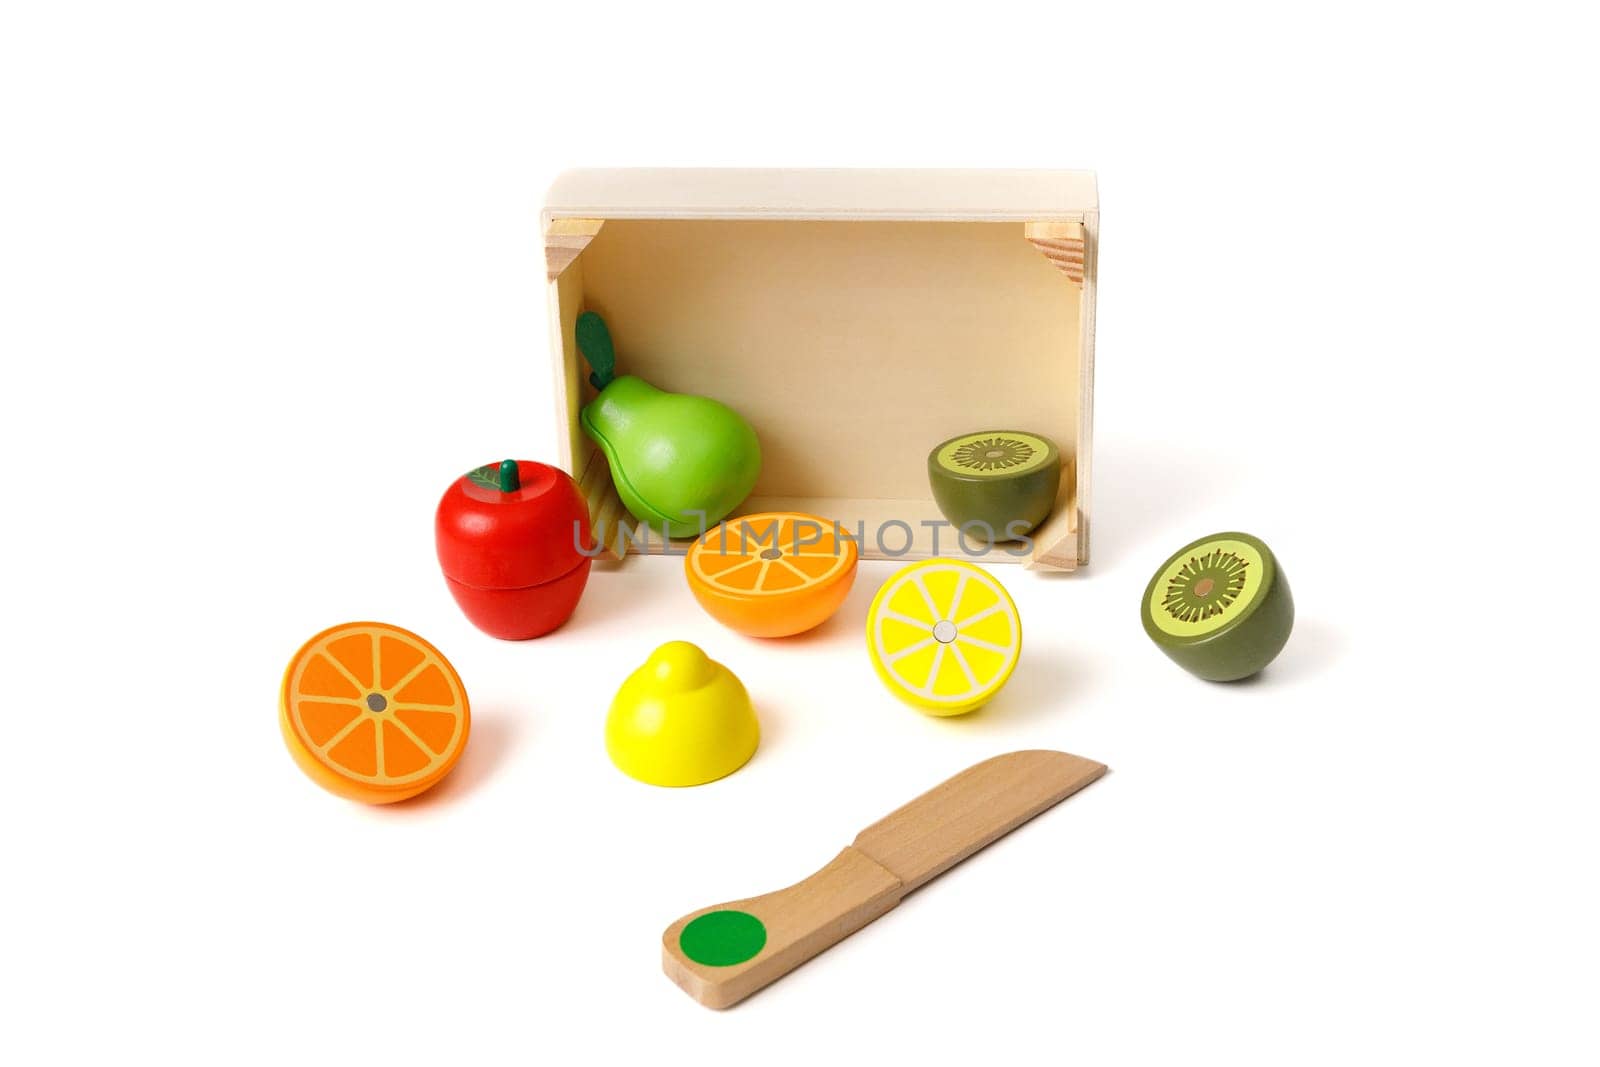 Wooden toy box with fruit and vegetables play set for learning and development of the child.